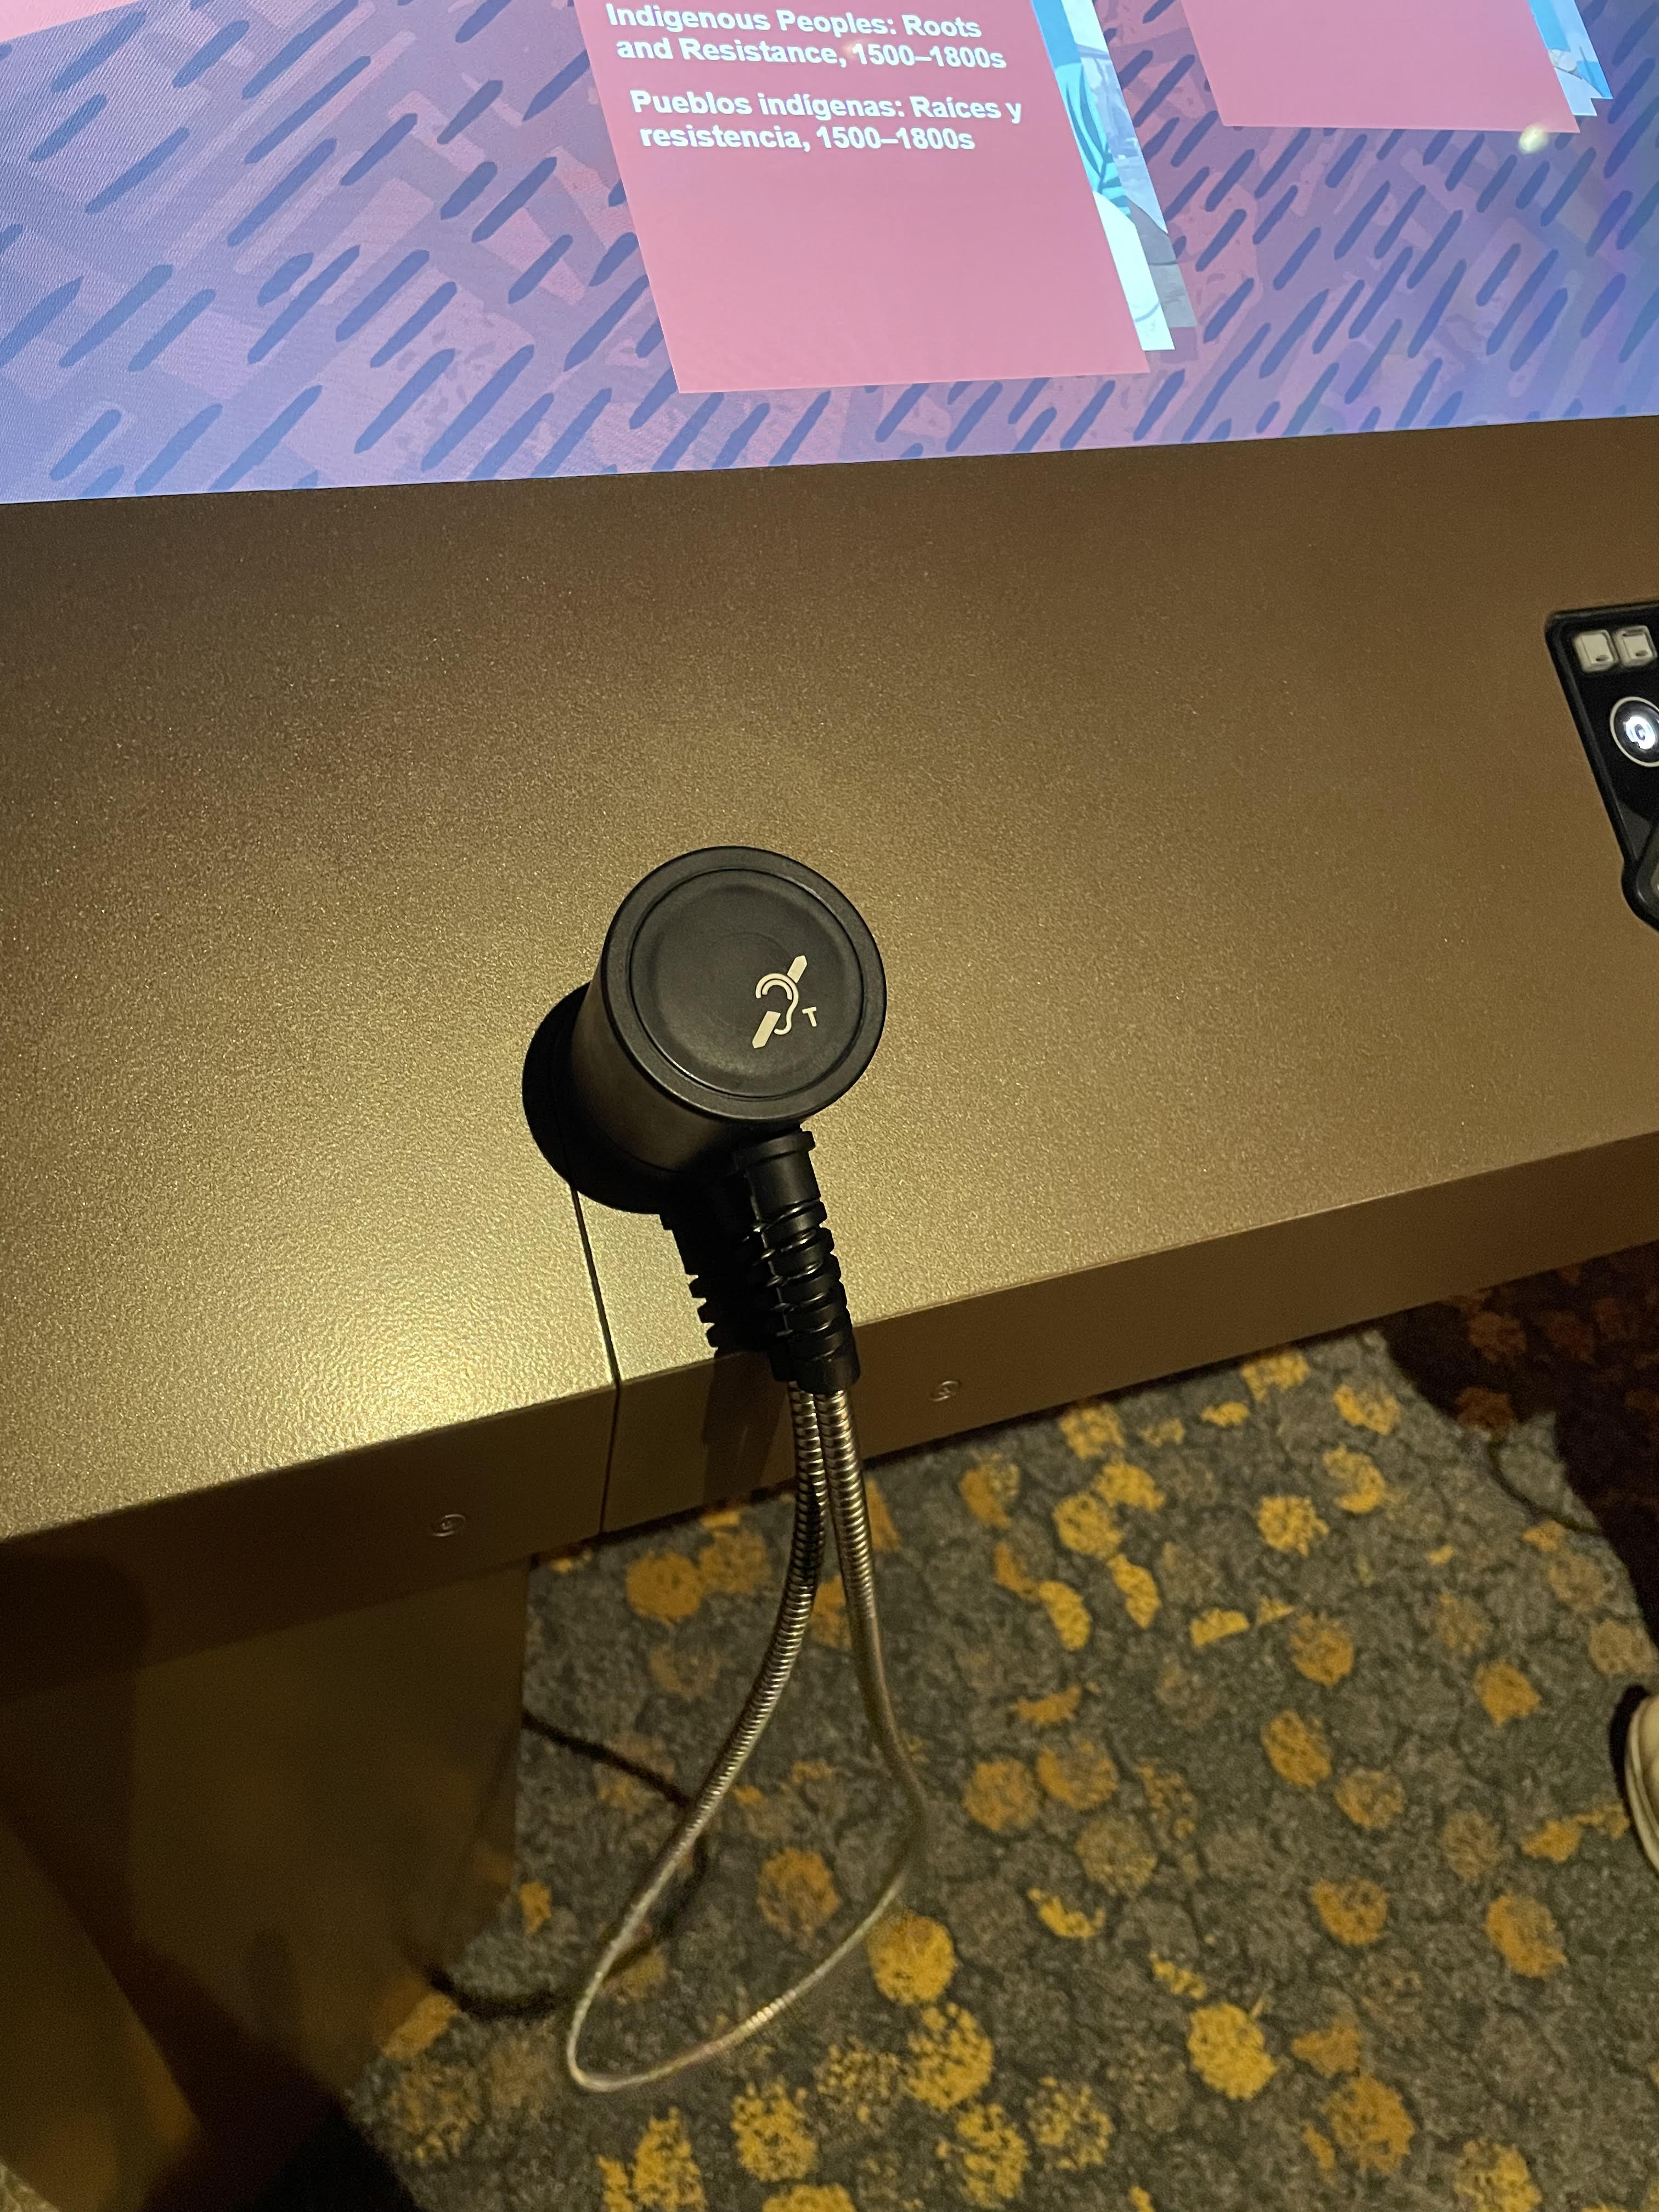 An earphone connected to a digital screen with an induction loop symbol on top